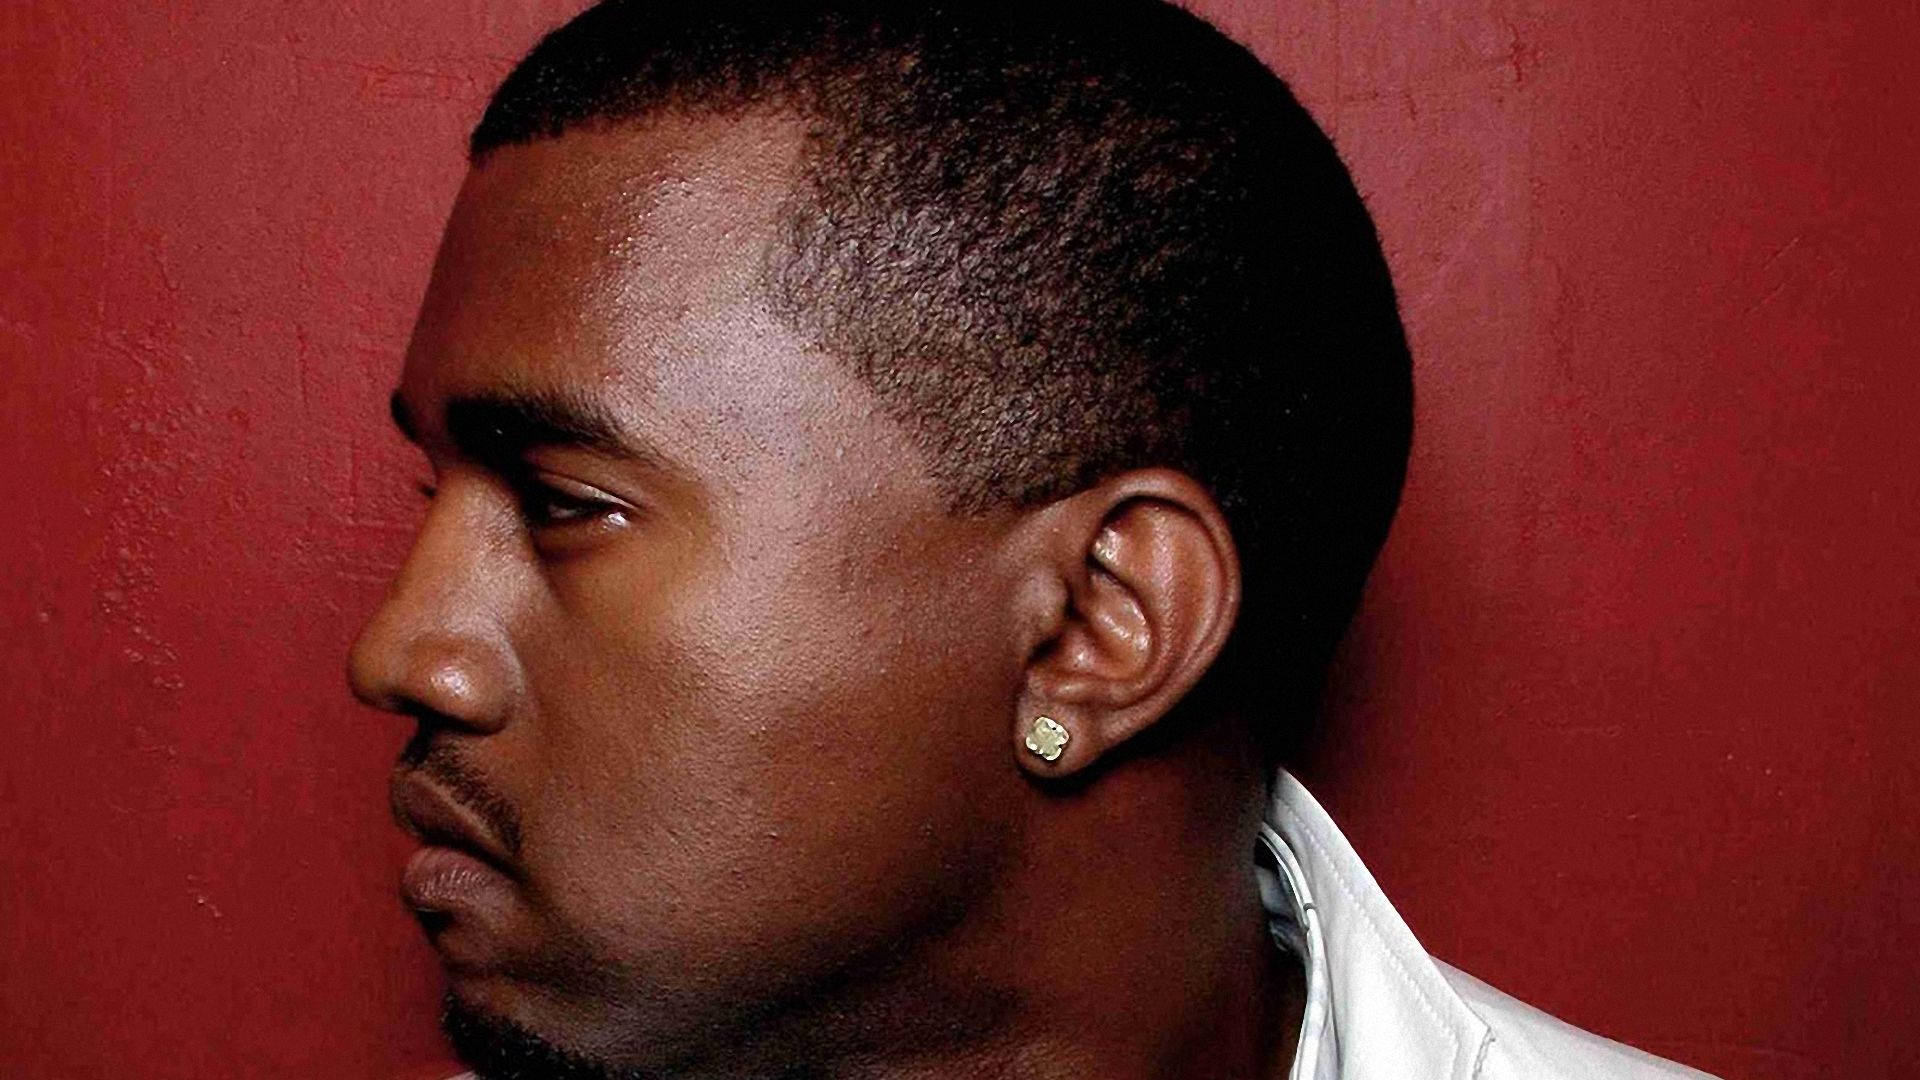 Kanye West Side View Profile Background